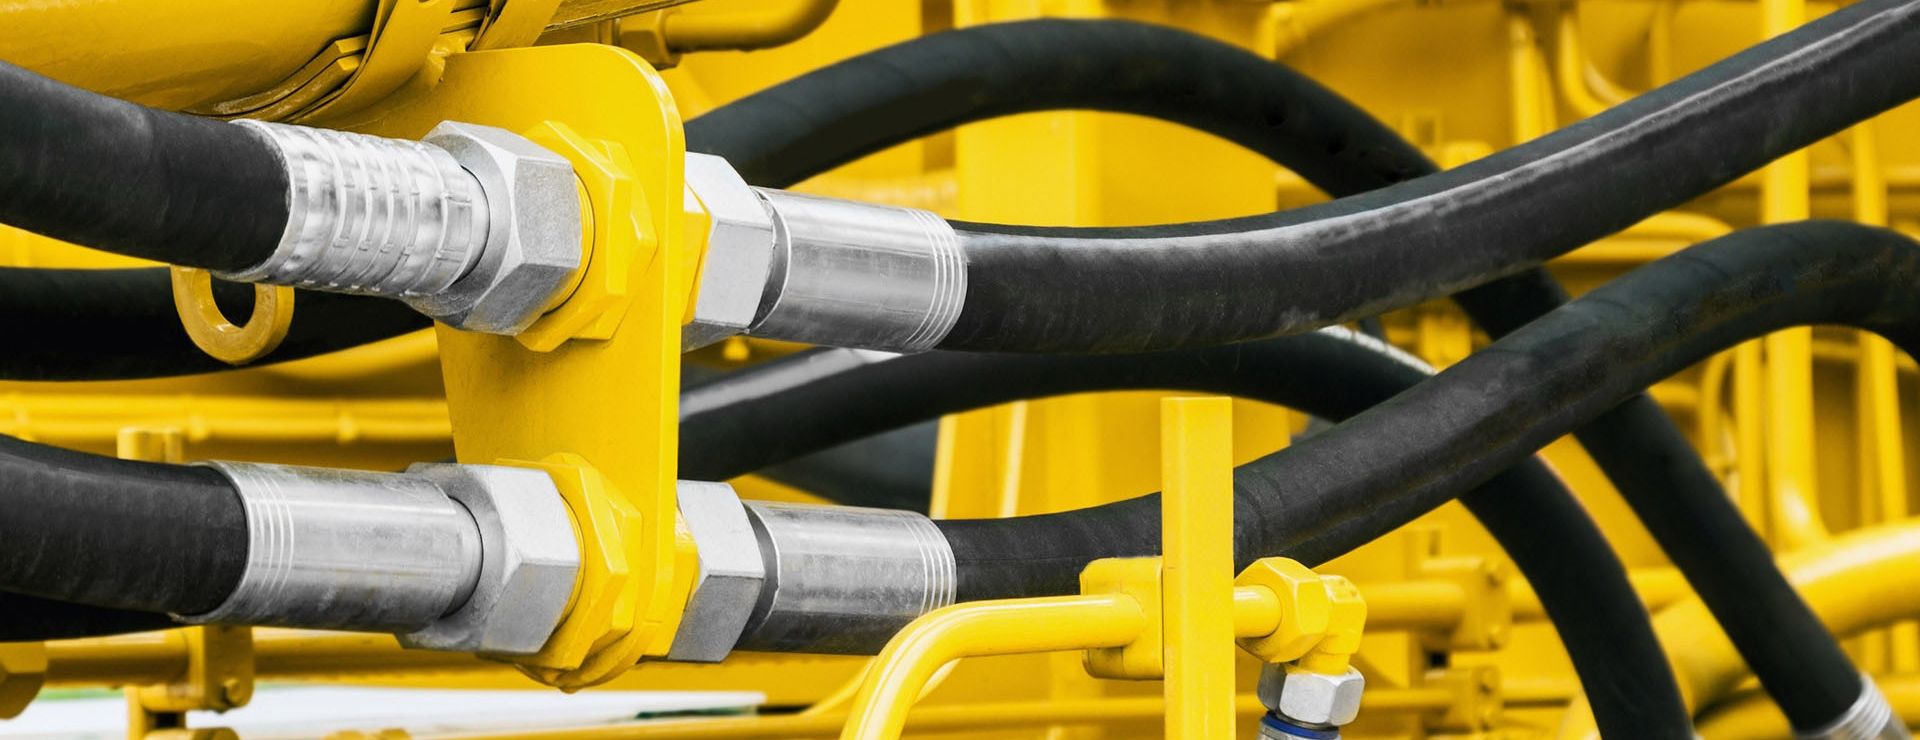 Several hoses are connected to the equipment with DME&JDE connectors.